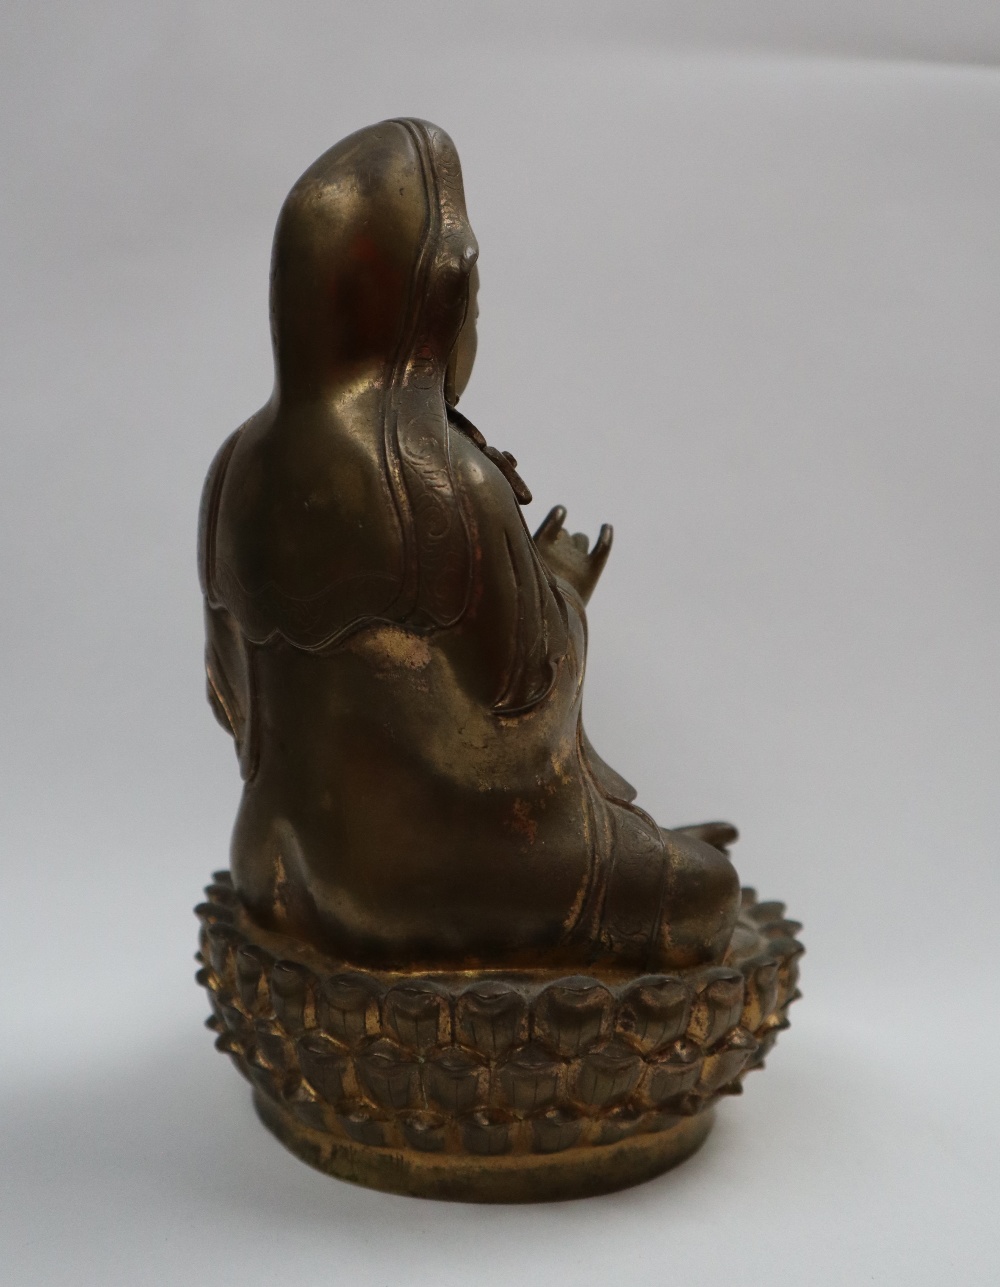 A Bronze figure of Quan yin, seated with right hand raised and left hand resting on her leg, - Image 5 of 9